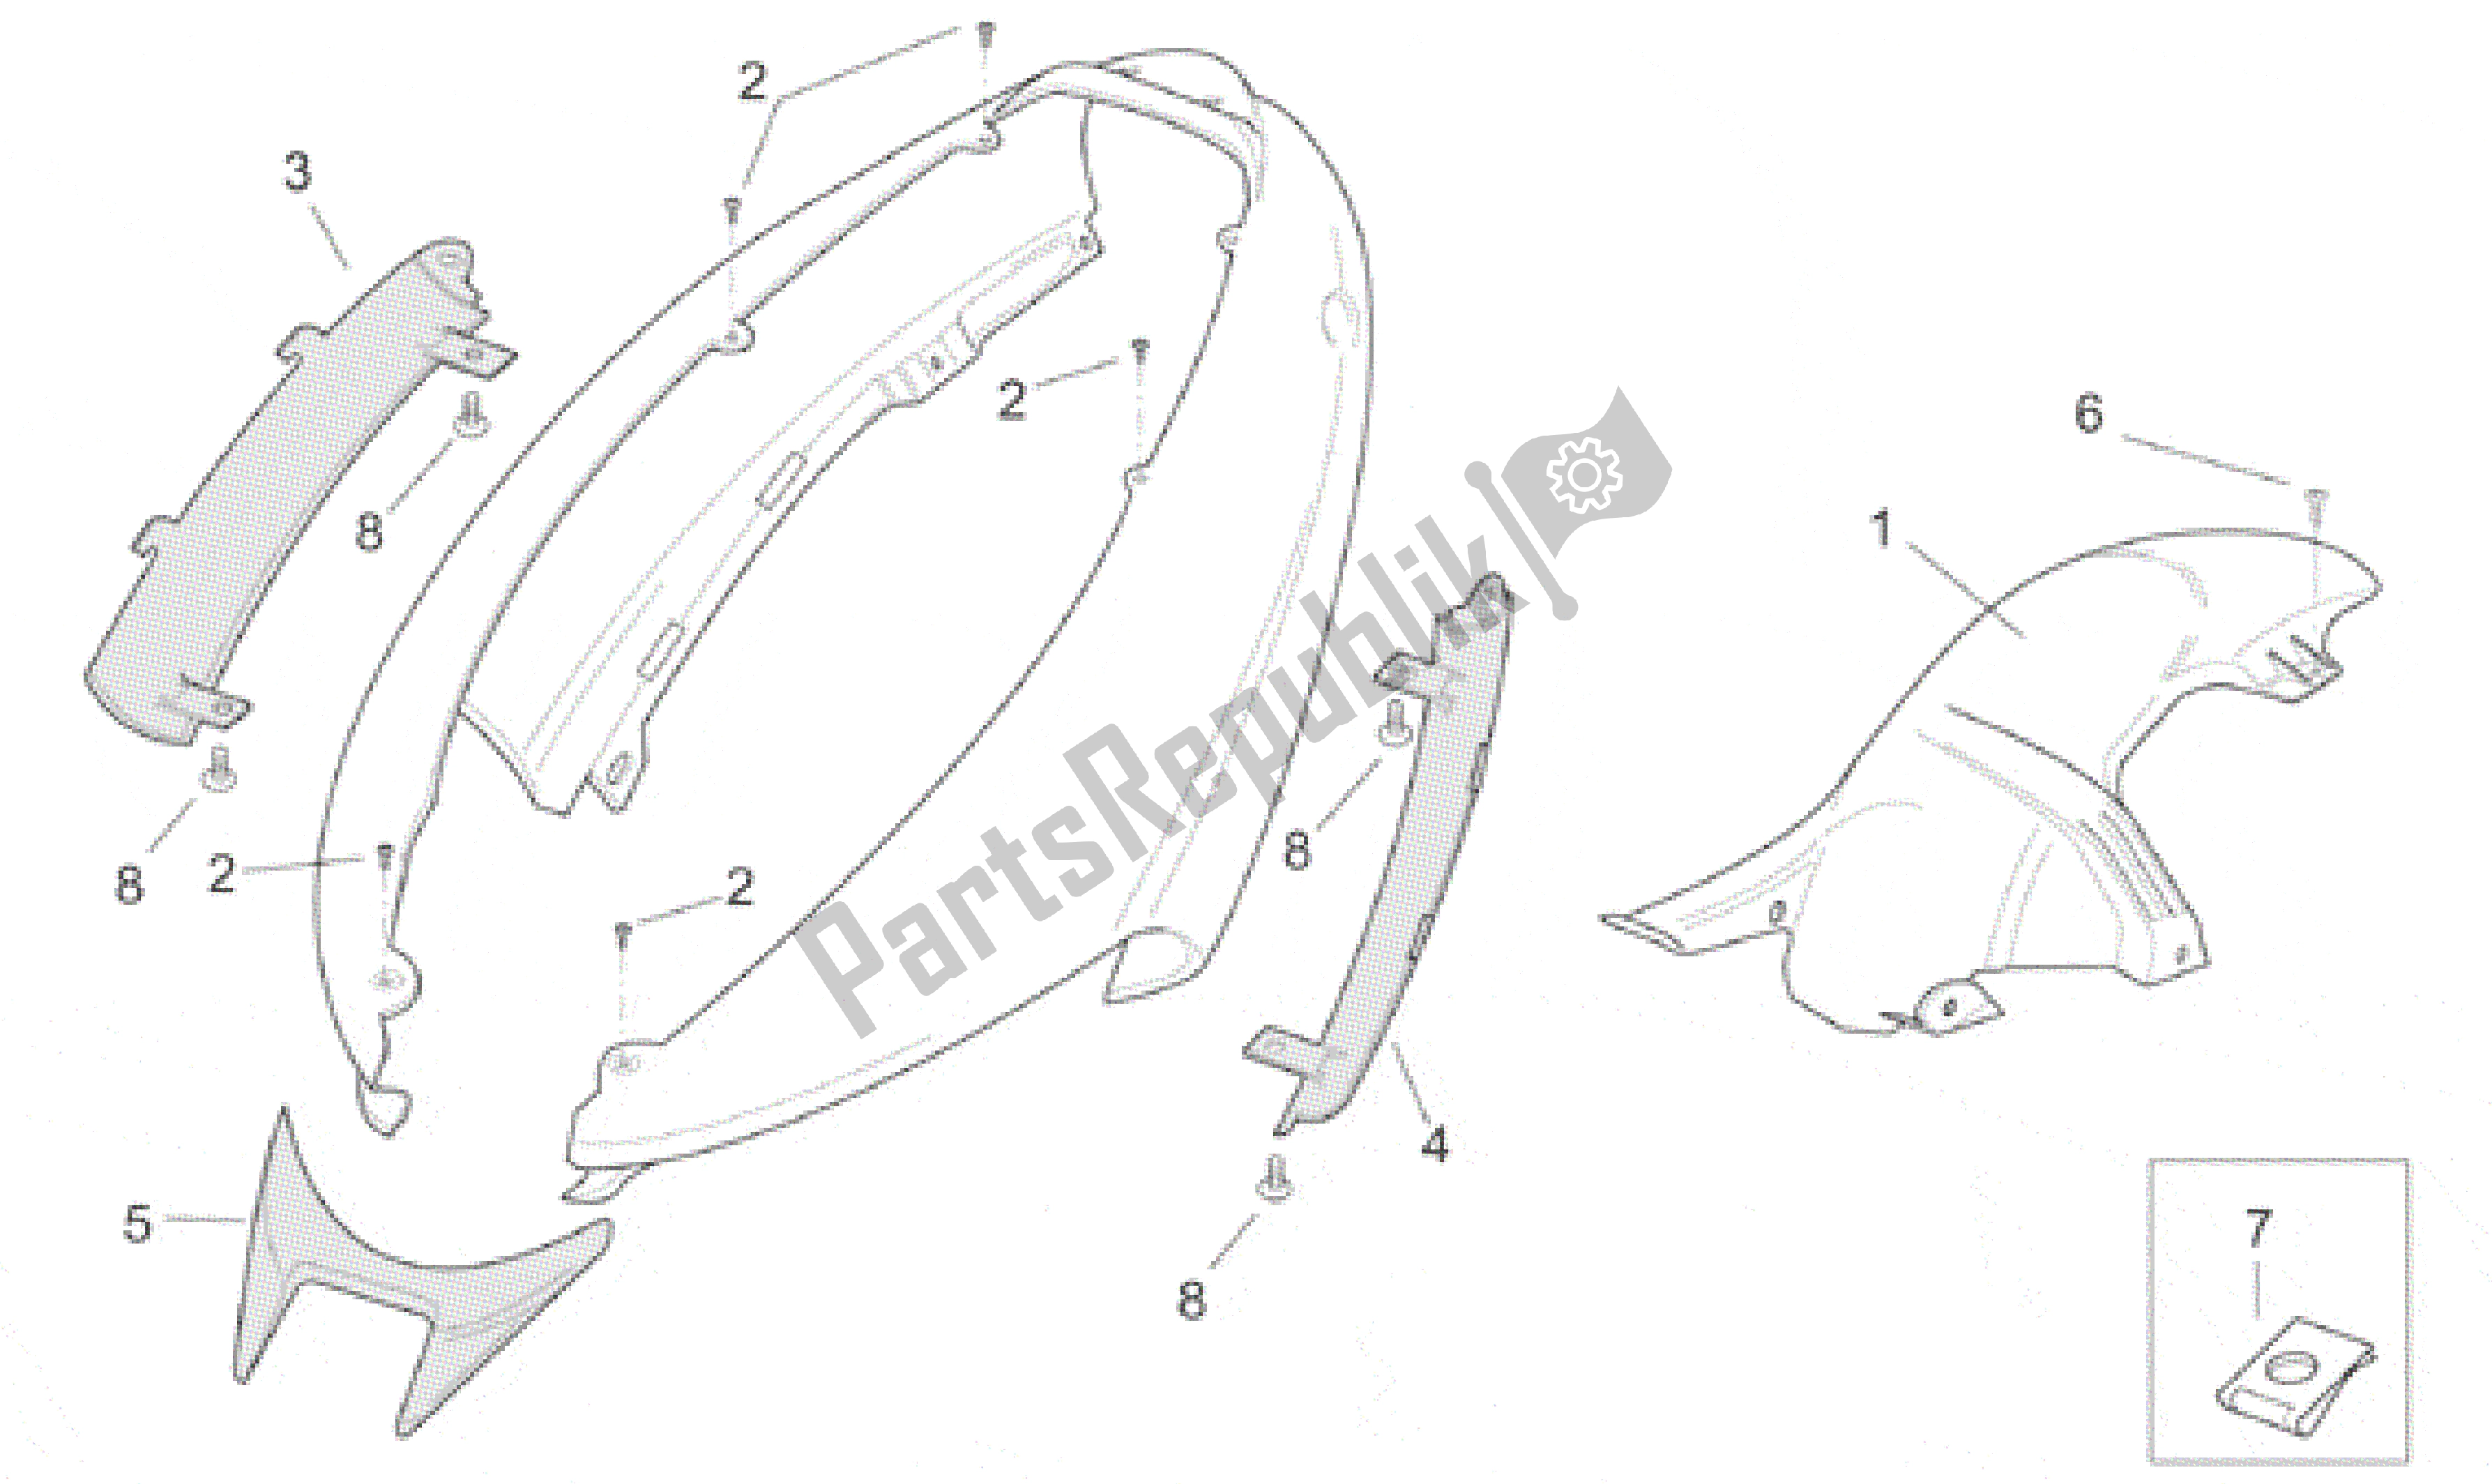 All parts for the Rear Body - Side Panels of the Aprilia SR 125 1999 - 2001